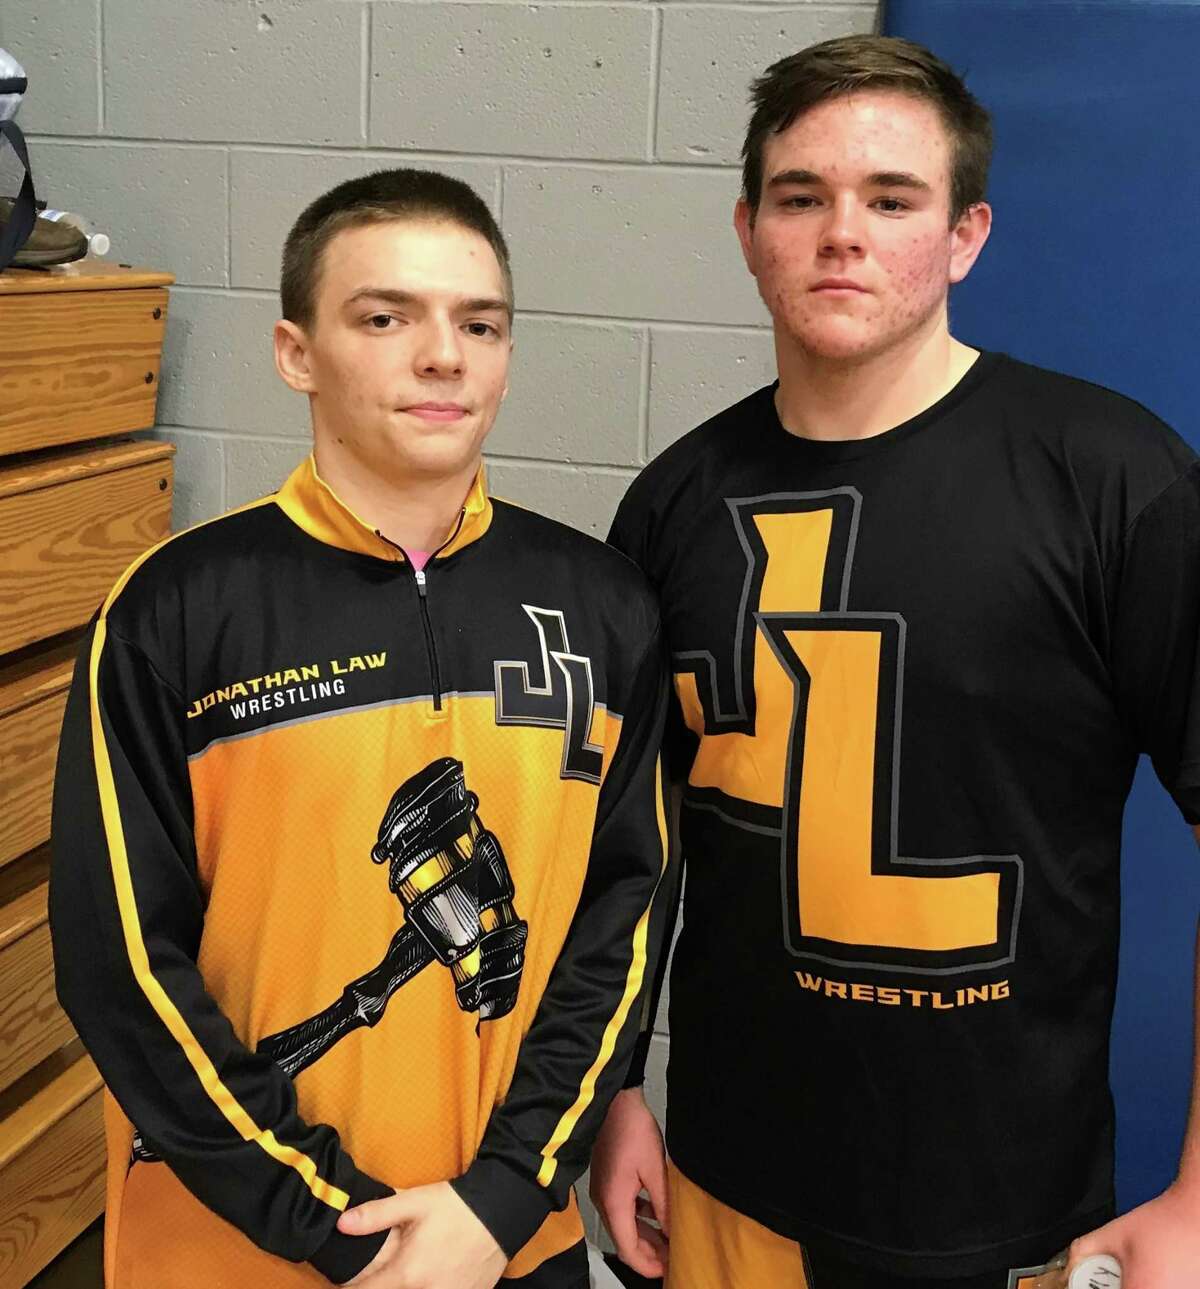 Dylan Benedetti and Kian McEnerney captain the Law wrestling team.